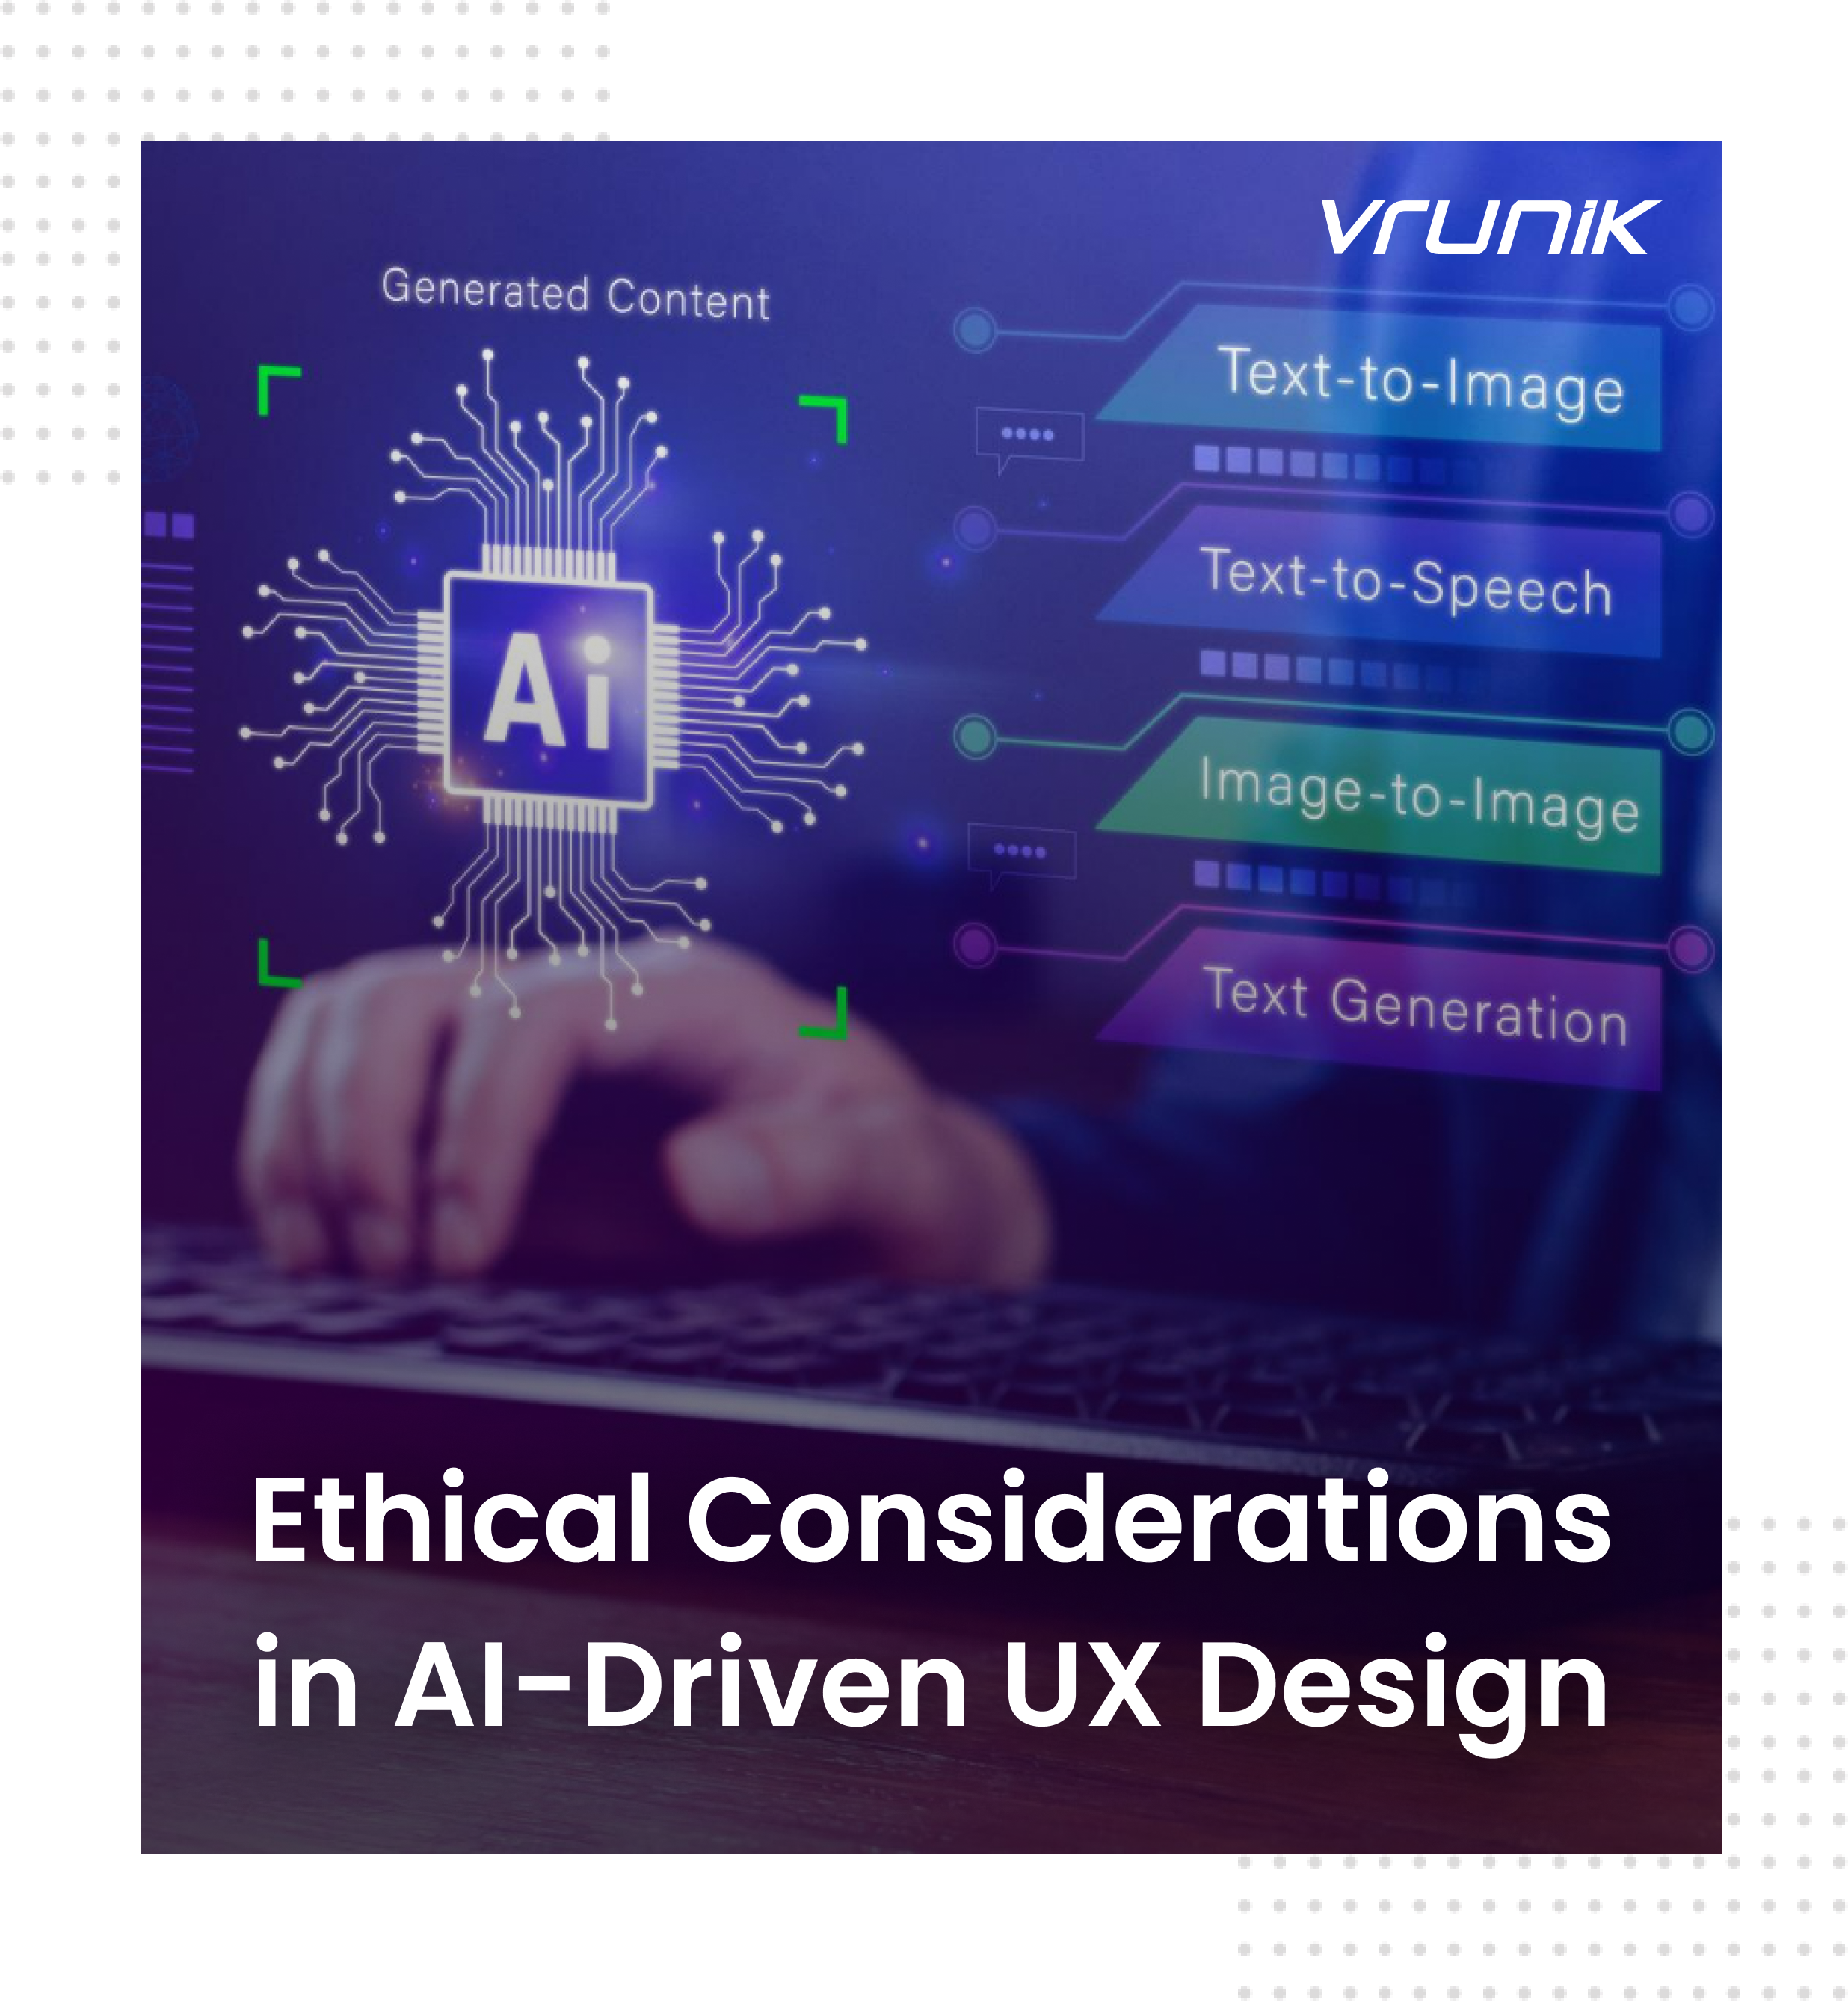 Ethical Considerations in AI-Driven UX Design